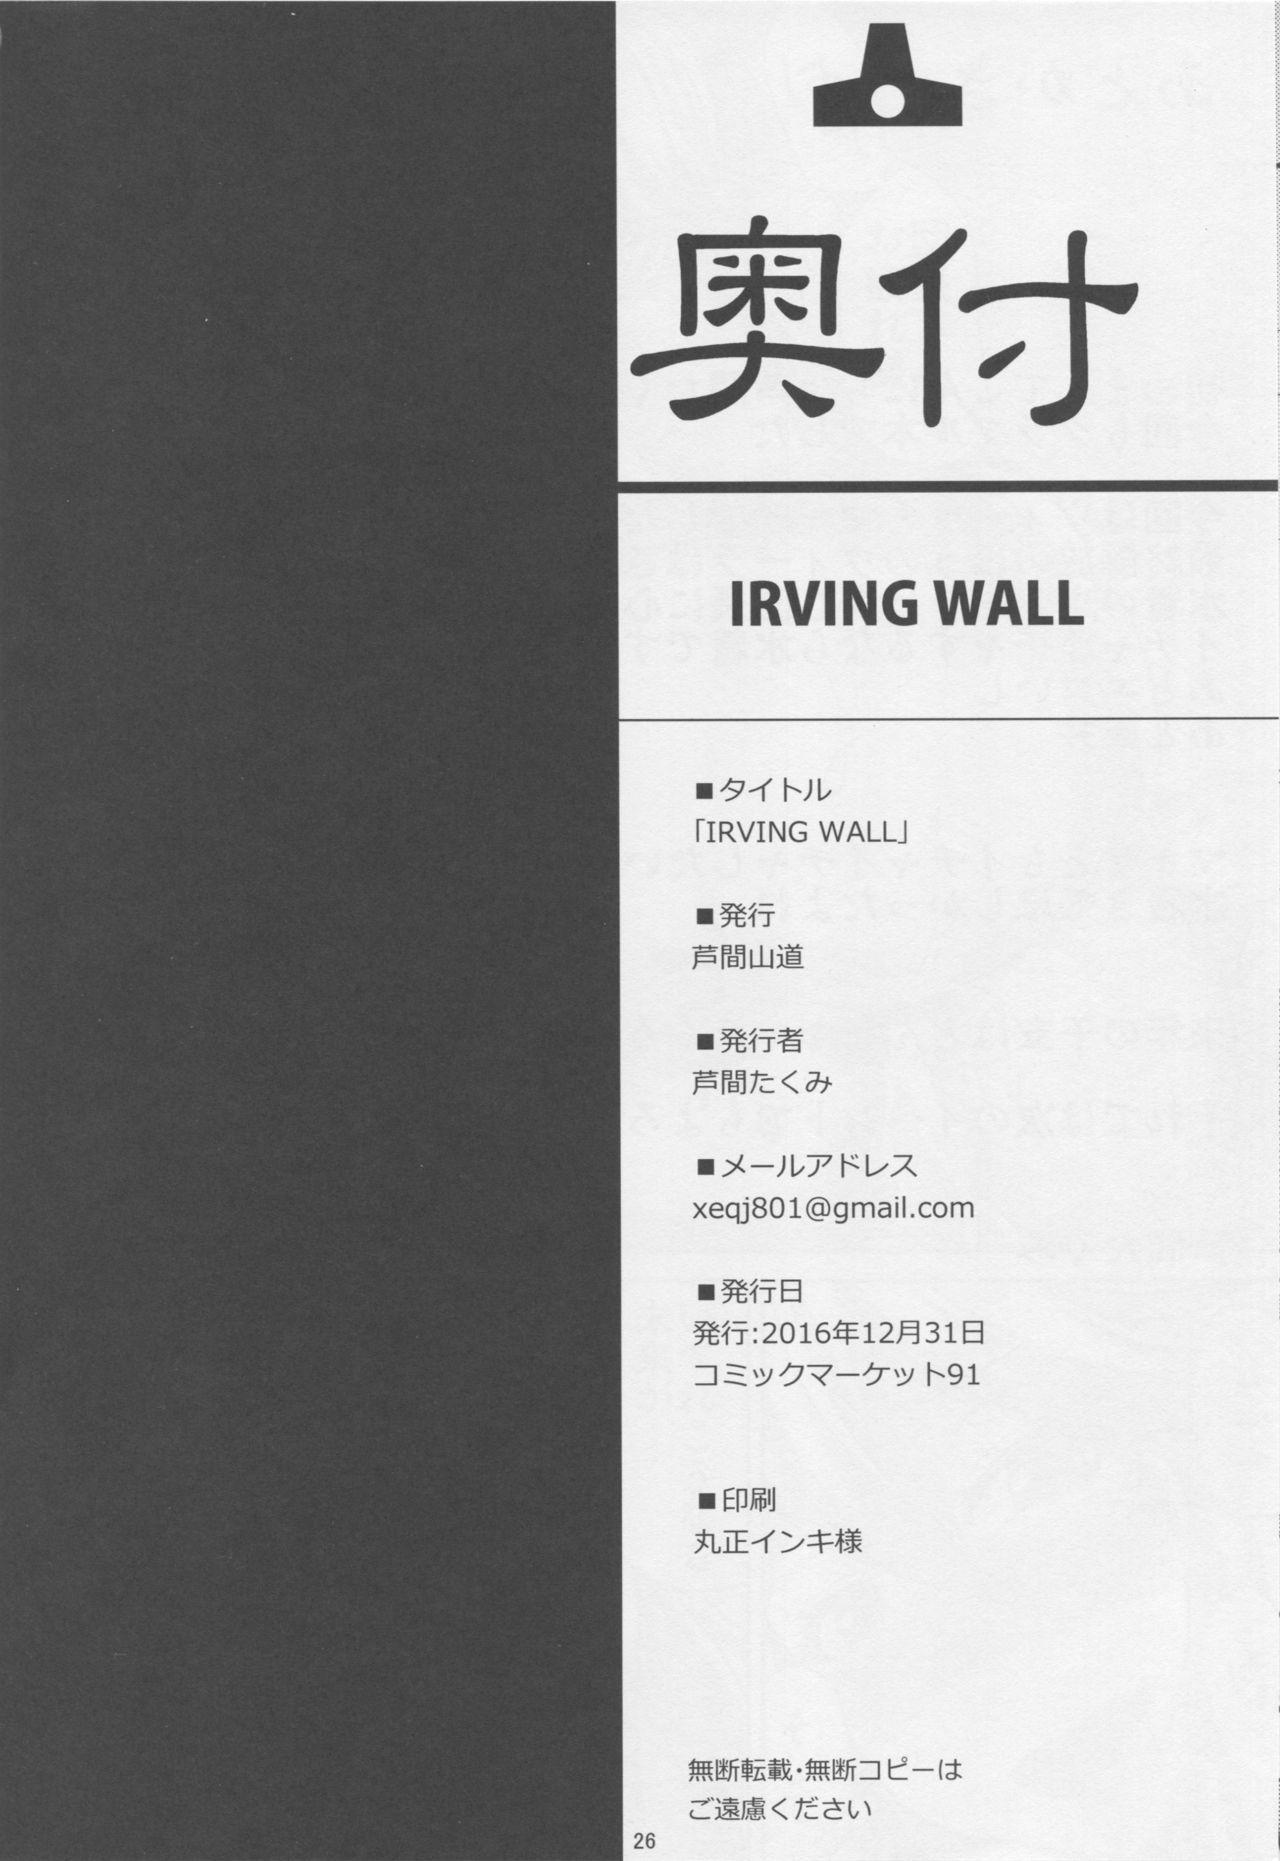 IRVING WALL 25